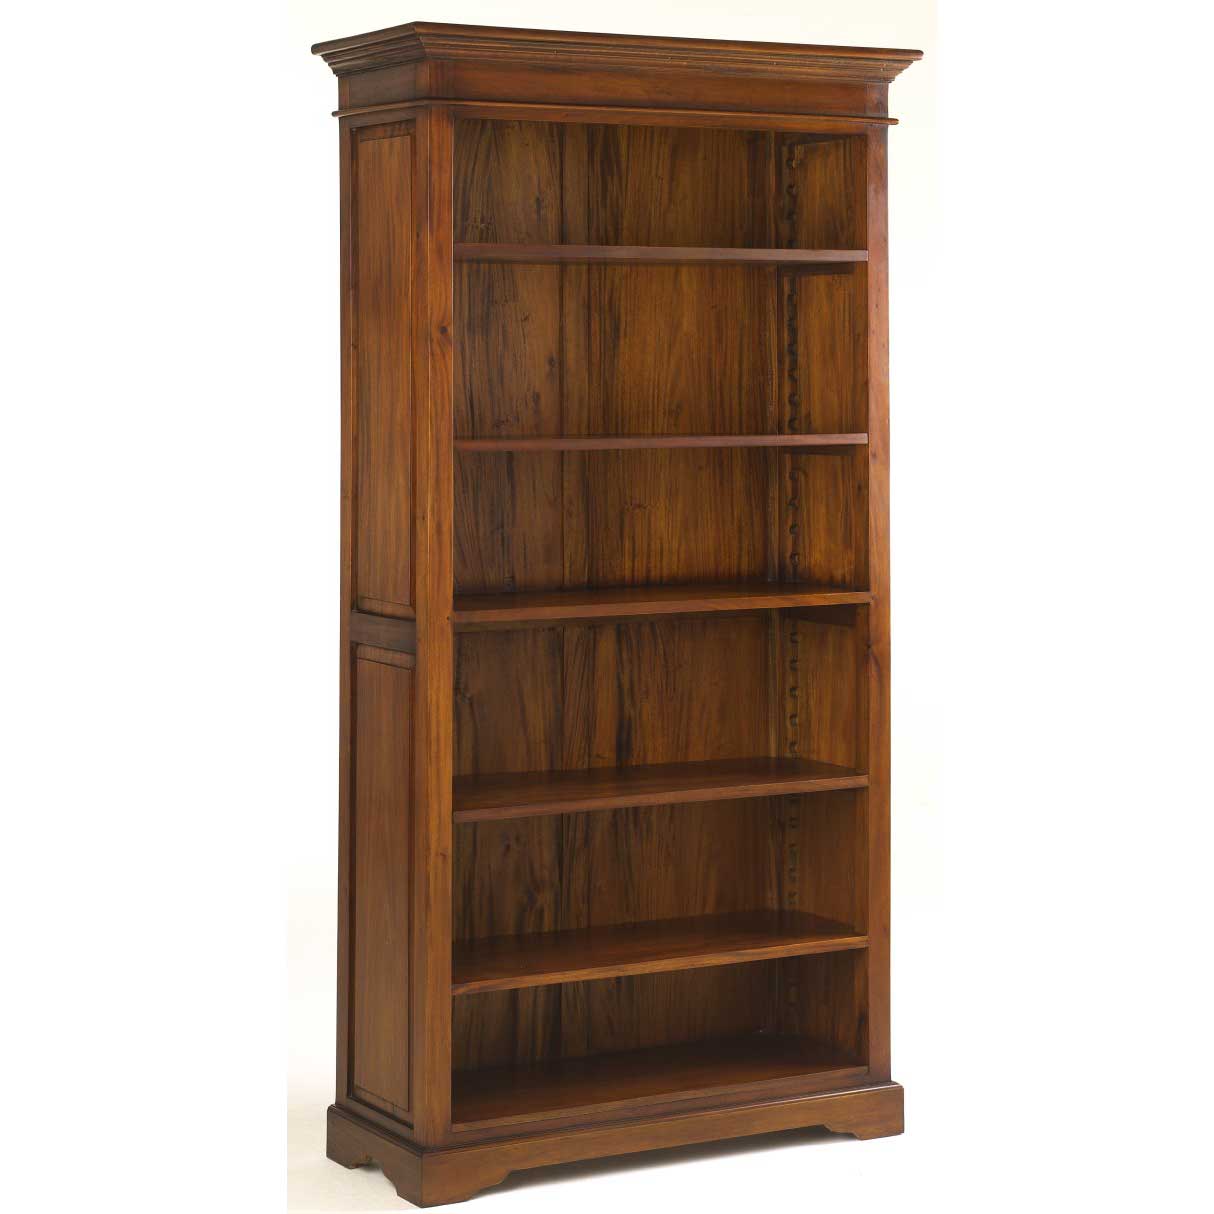  Bookshelf http://office-turn.com/solid-wood-bookcases-for-home-office